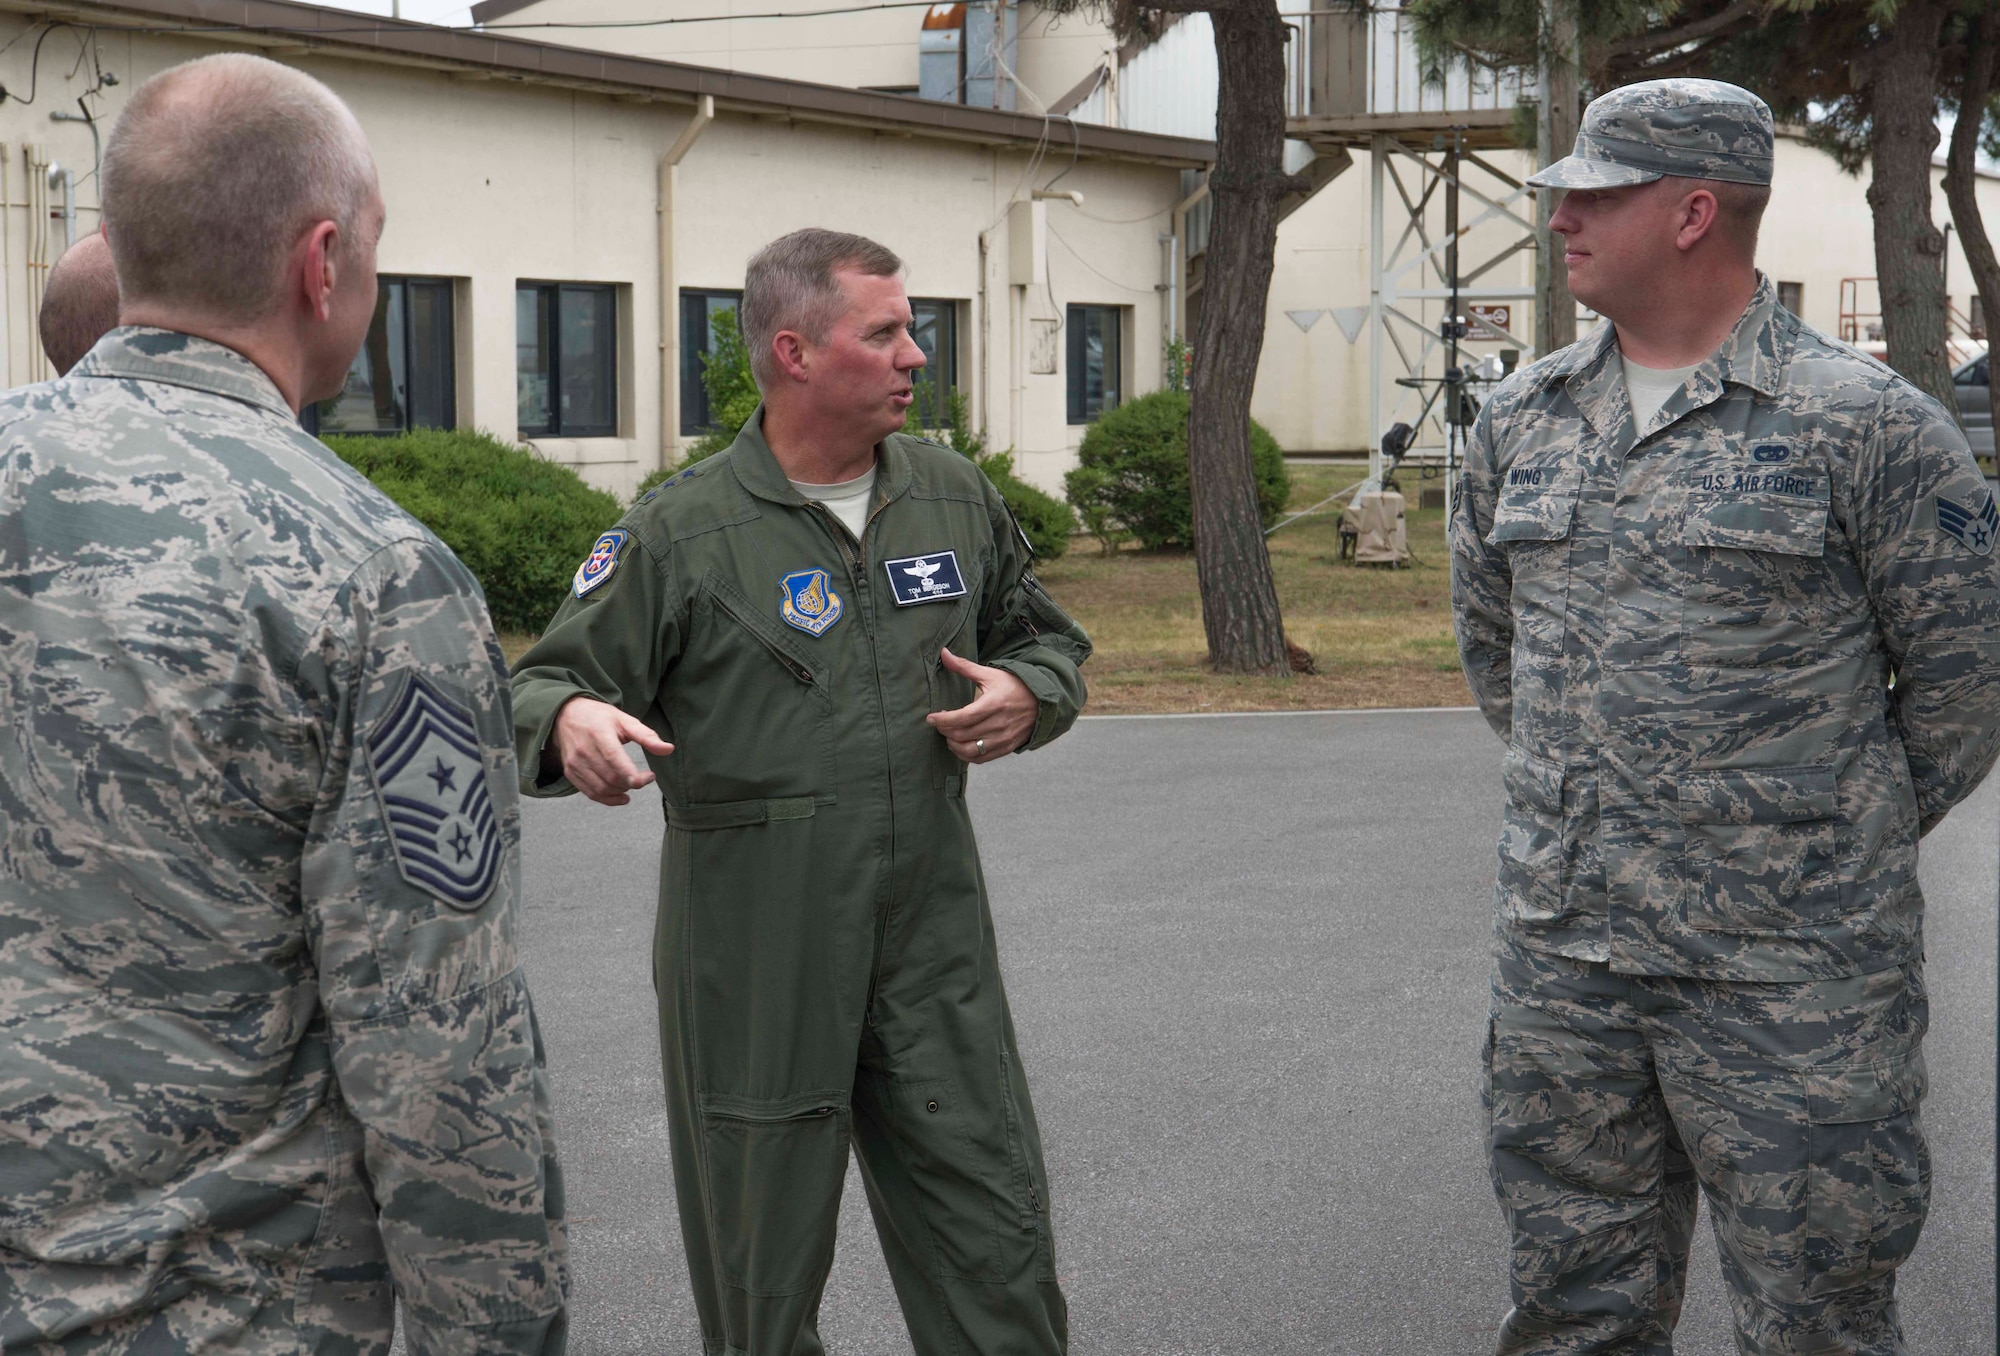 Lt. Gen. Thomas Bergeson, 7th Air Force commander, speaks with Senior Airman Alexander Wing, a vehicle operator from the 8th Logistics Readiness Squadron, during a visit at Kunsan Air Base, Republic of Korea, June 22, 2018. While at Kunsan, Bergeson visited Airmen and met with Wolf Pack leadership from across the base. (U.S. Air Force photo by Tech. Sgt. Charles McNamara)